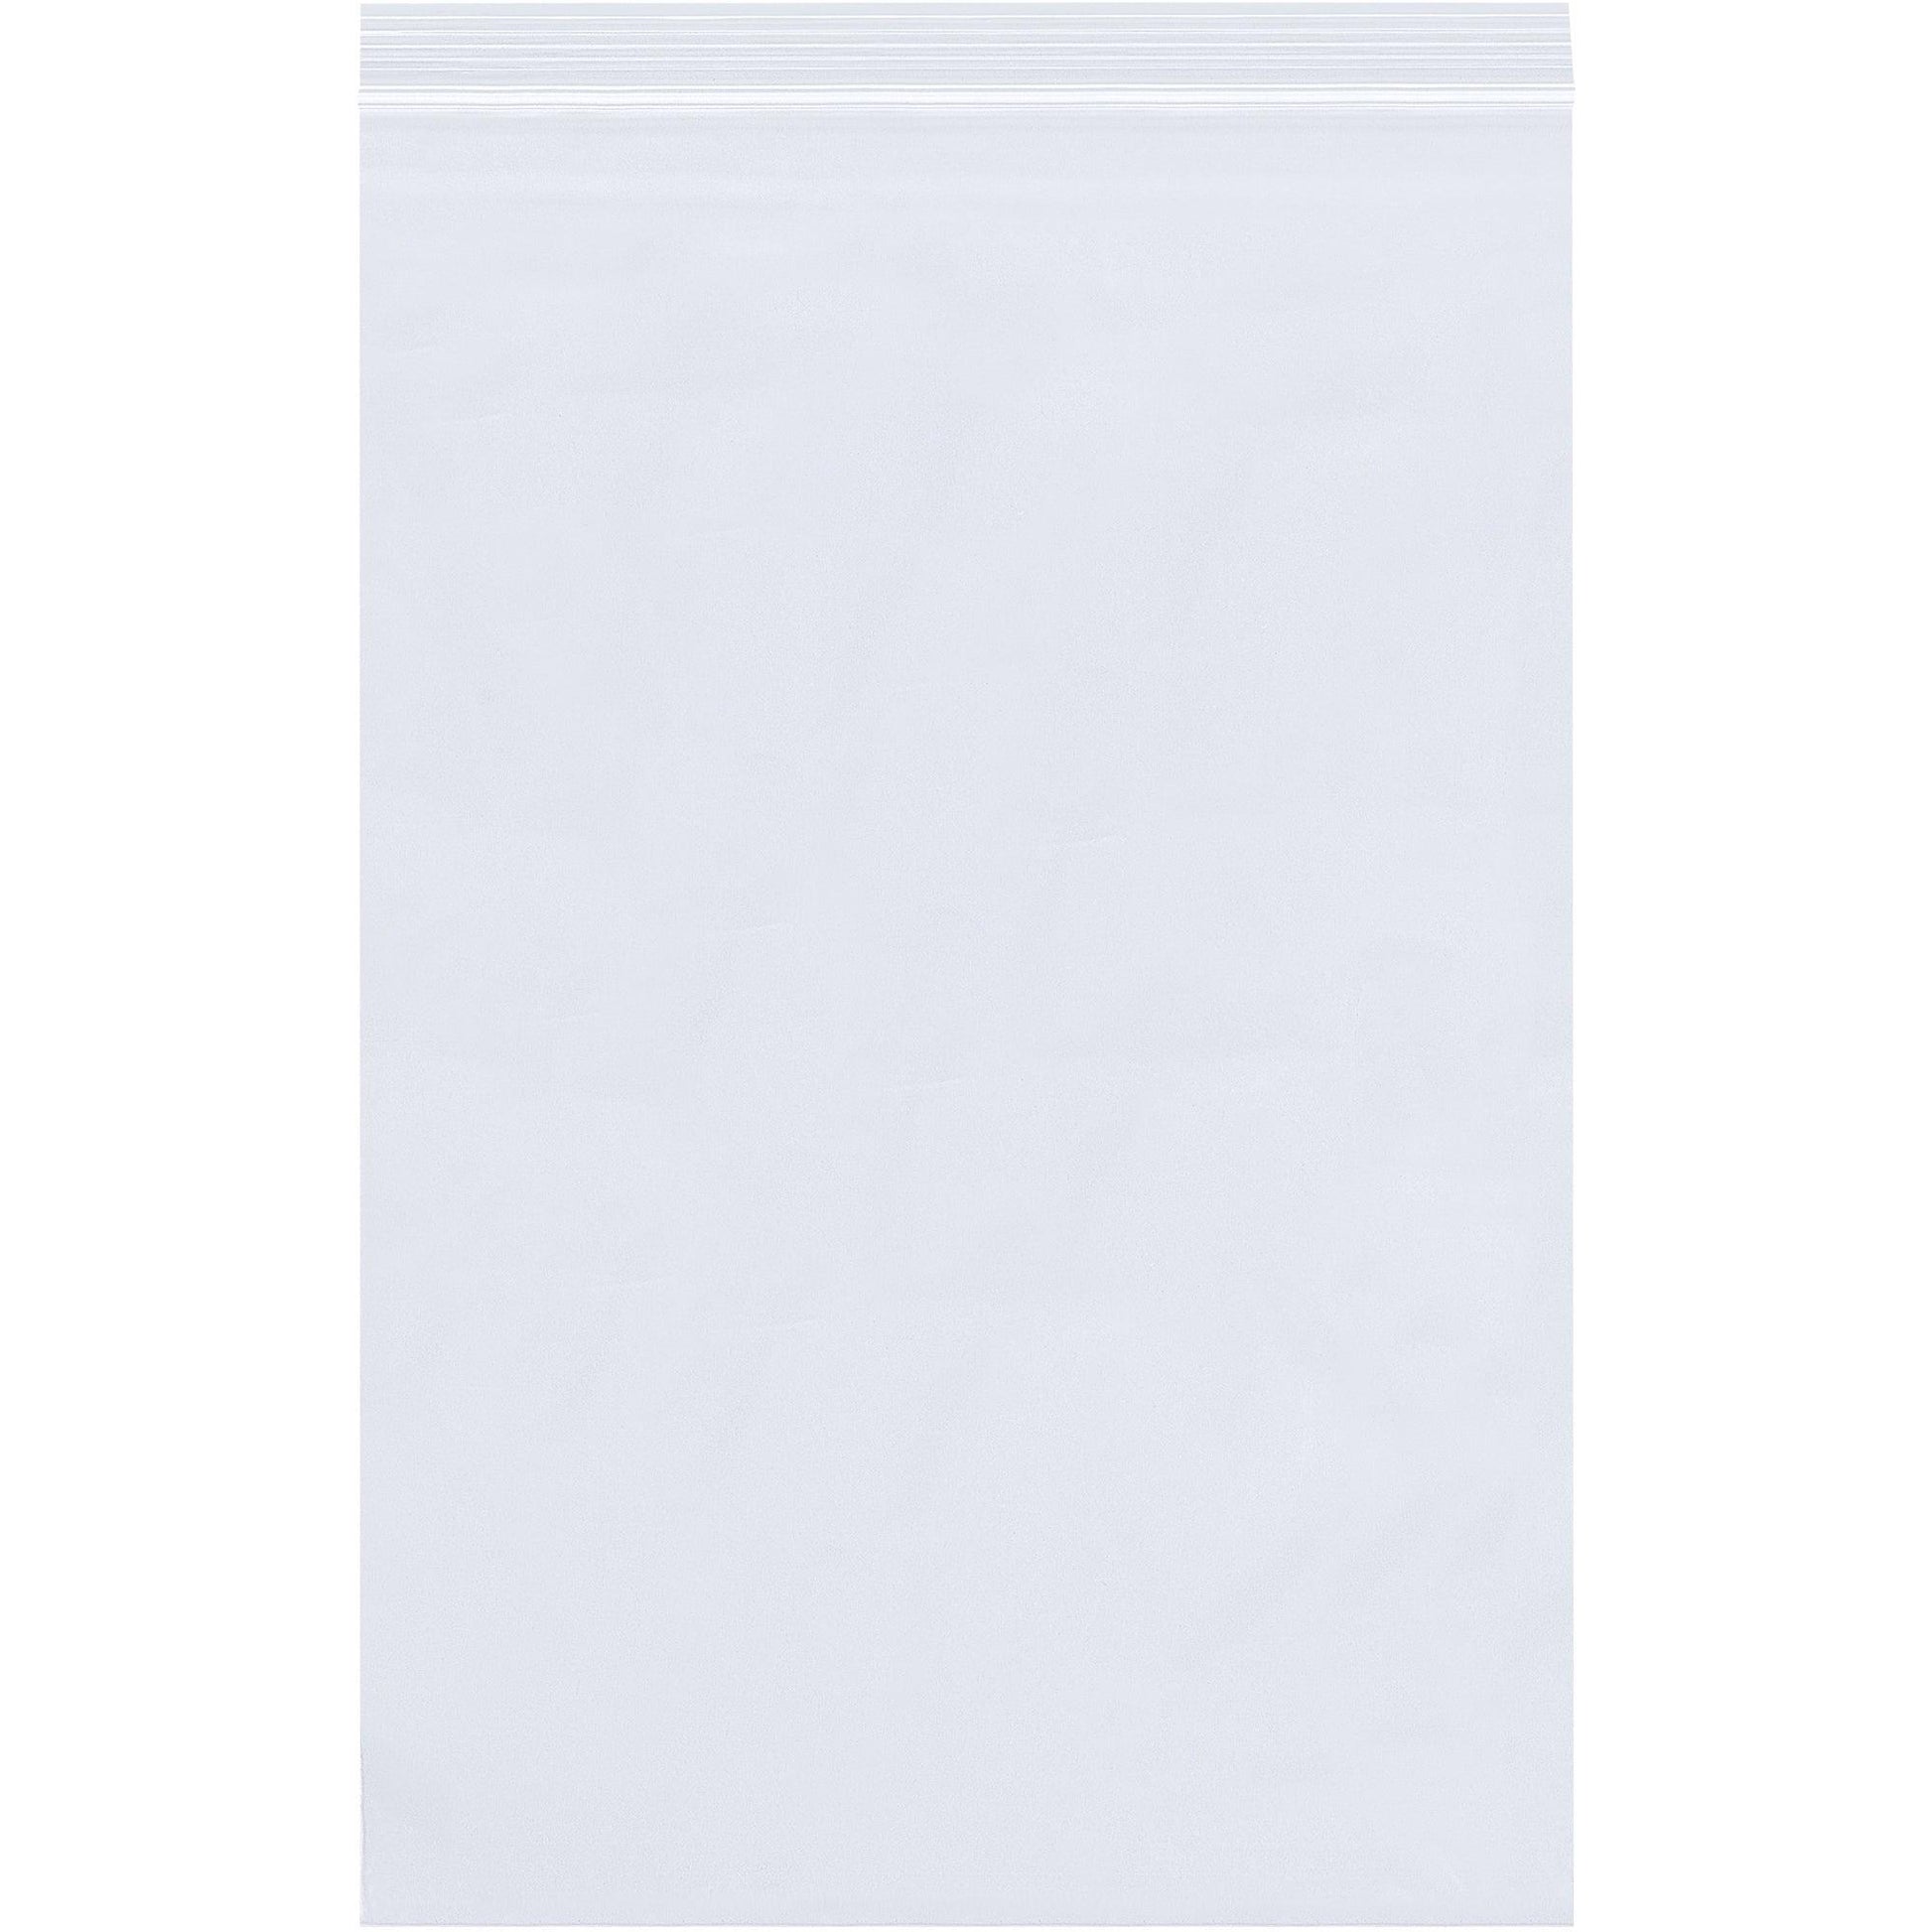 12 x 12" - 2 Mil Reclosable Poly Bags - PB3665